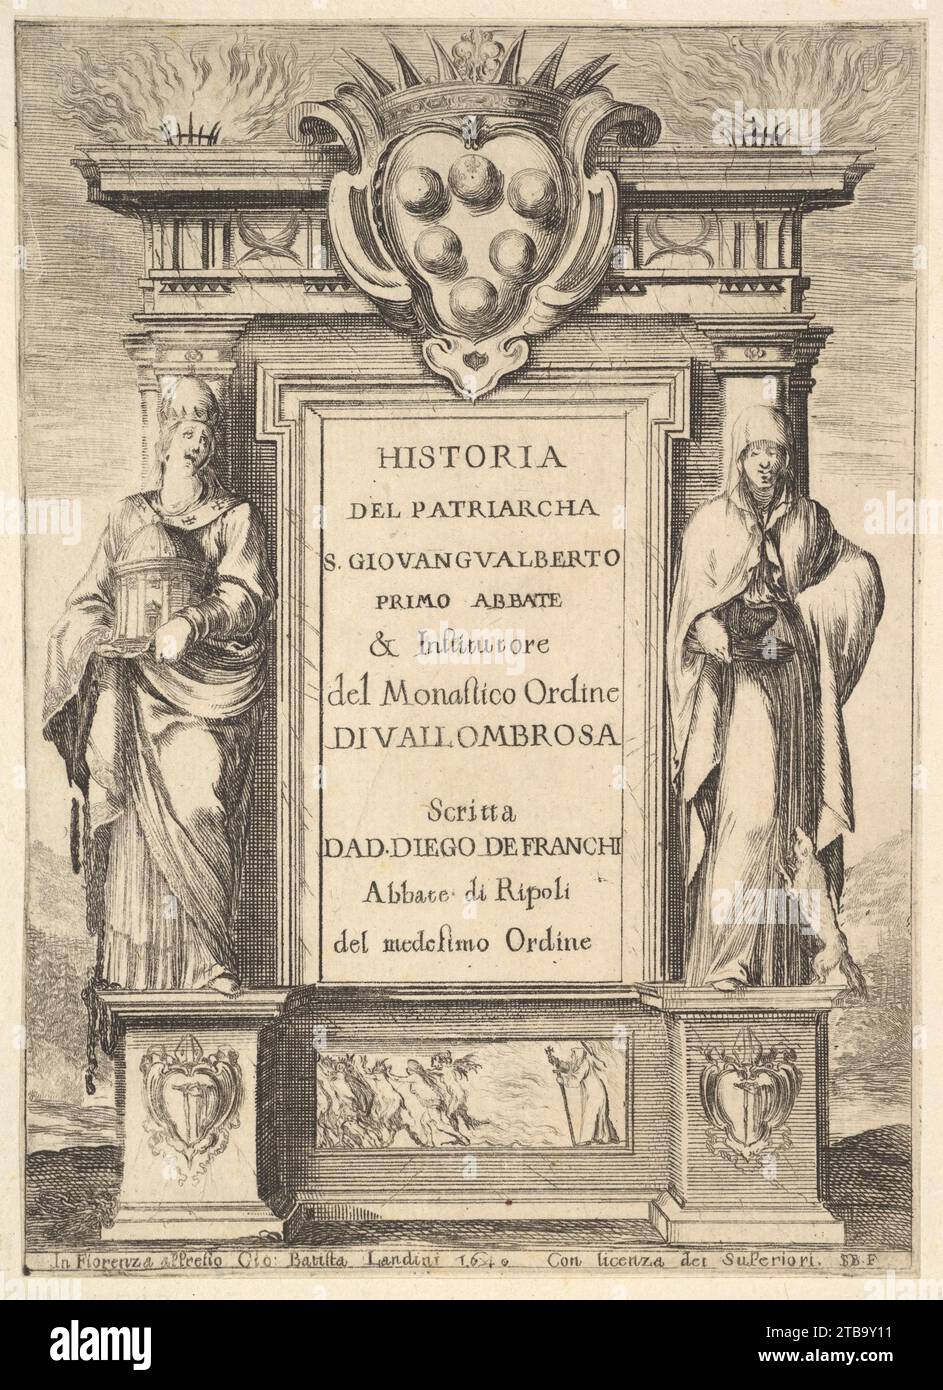 Frontispiece: a monument decorated with the Medici coat of arms at top in center, flames at top to either side, a hooded figure on right side of monument with a weasel below, a figure to left side wearing a papal crown, a scene of a monk chasing away demons with a cross on base of monument, from 'Frontispiece and four scenes from the life of Saint John Gualbert' (Frontispice et quatre vignettes pour une vie de Saint Jean Gualbert) 2012 by Stefano della Bella Stock Photo